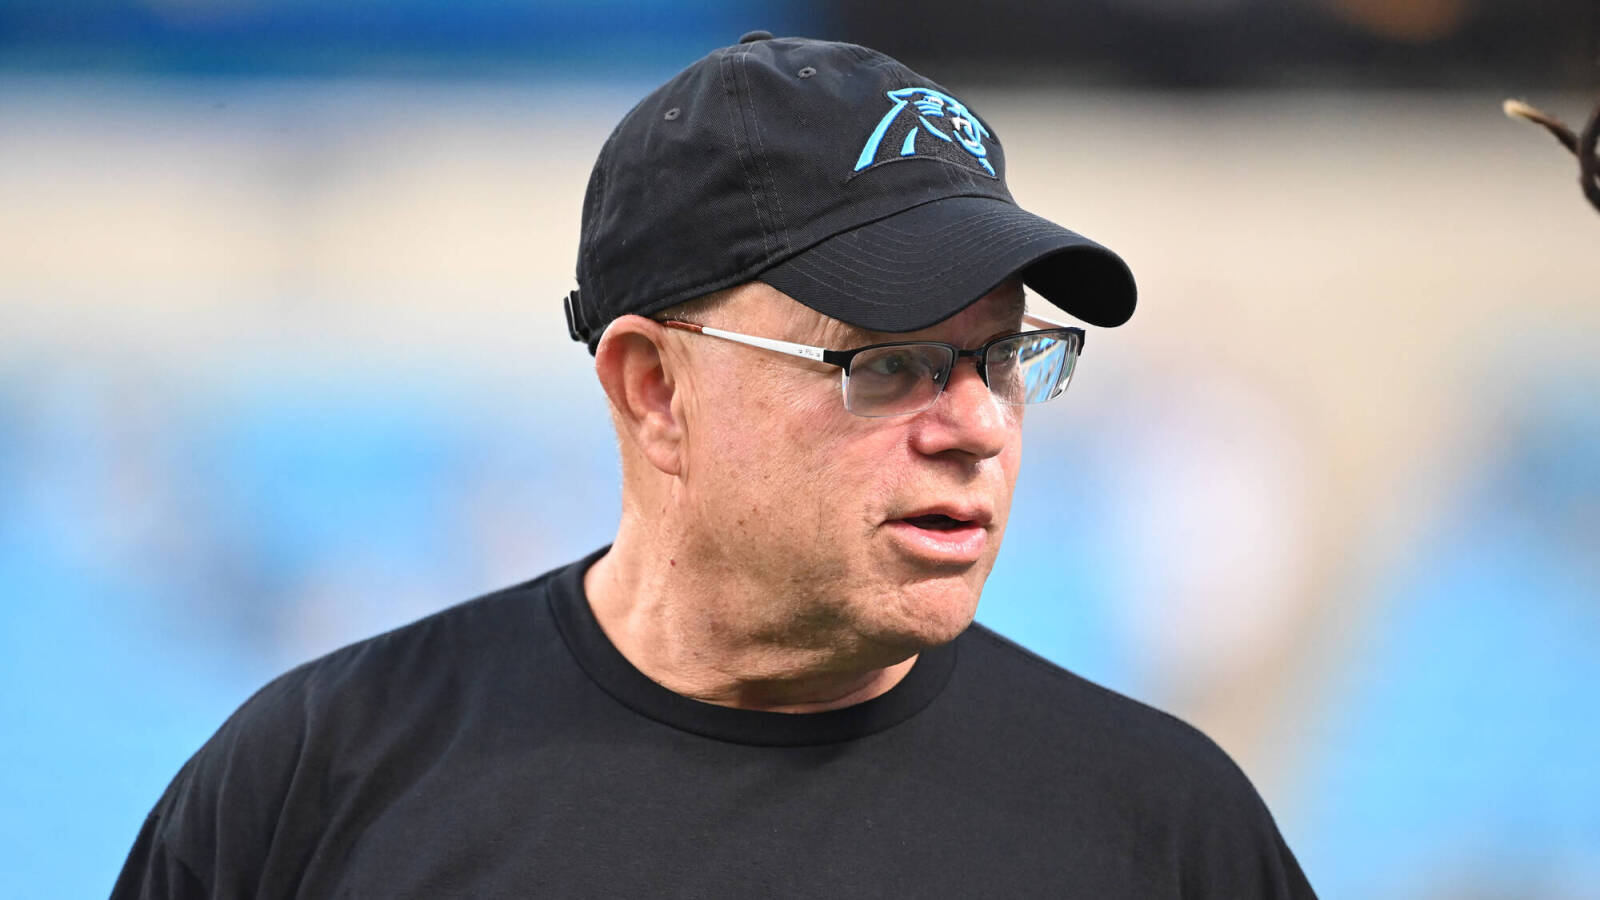 Panthers owner David Tepper visits restaurant that posted pointed sign